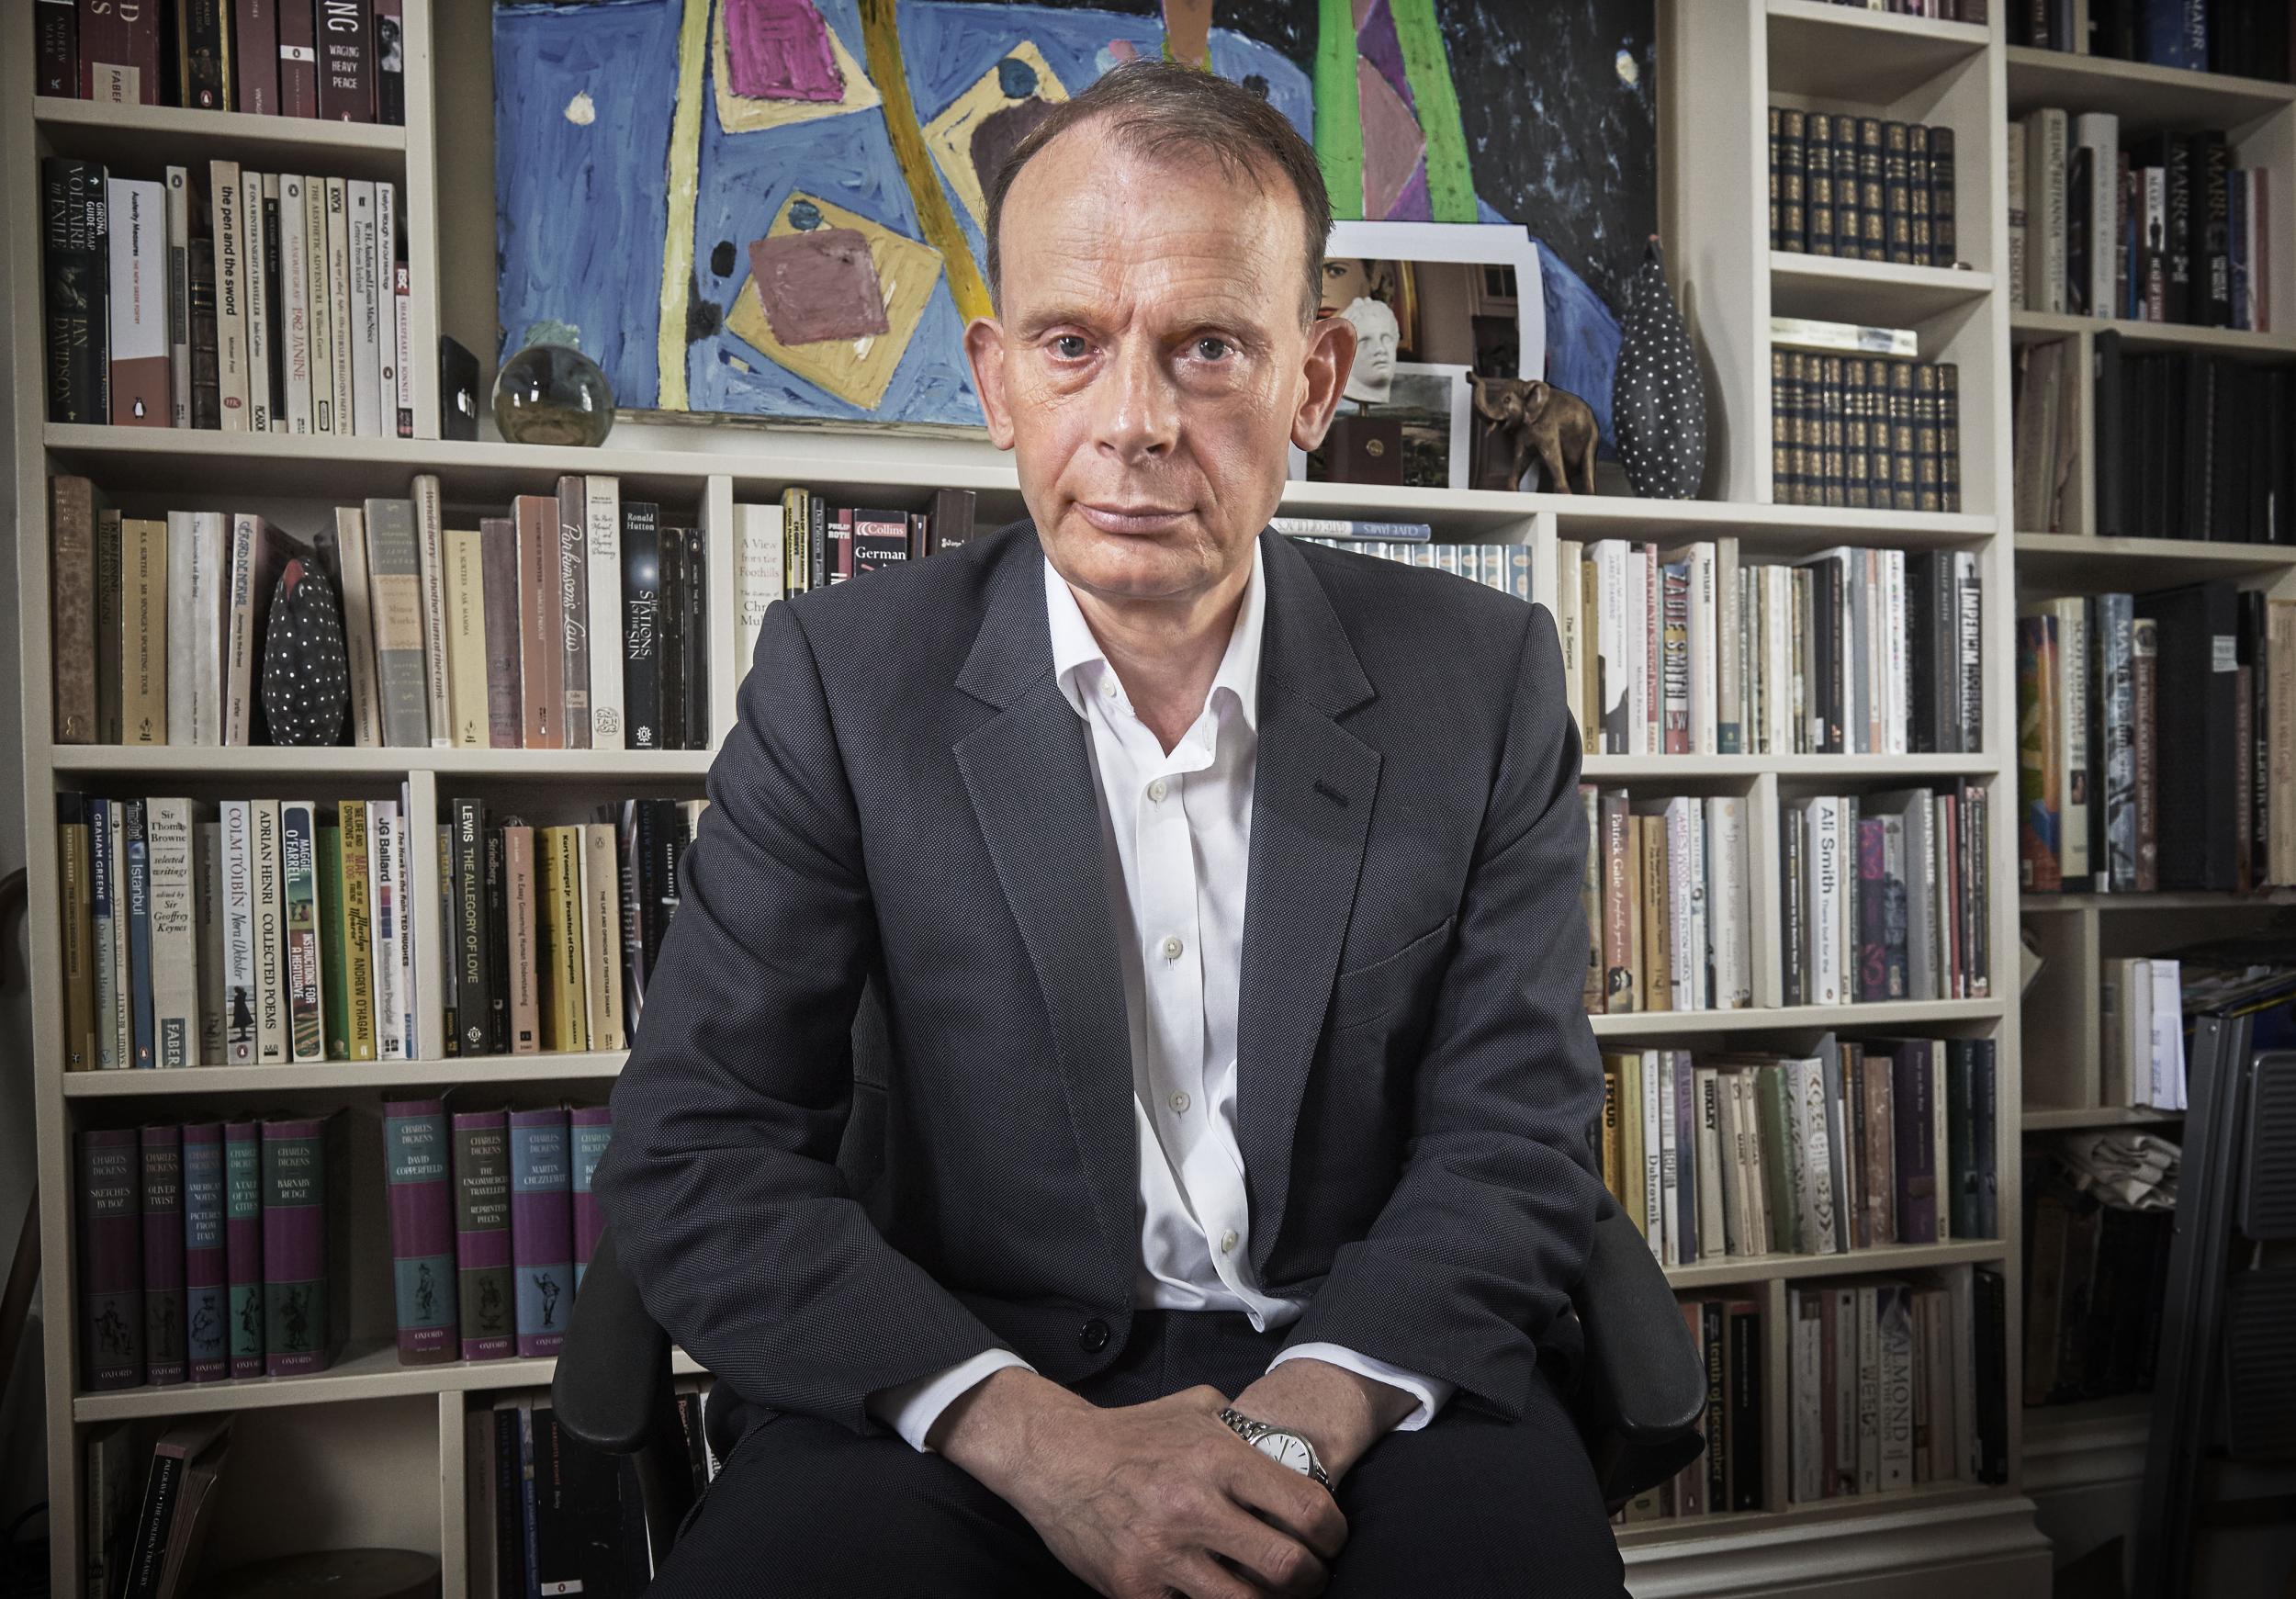 ‘Andrew Marr: My Brain and Me’ is a difficult and sobering hour of viewing as the broadcaster discusses his stroke in 2013